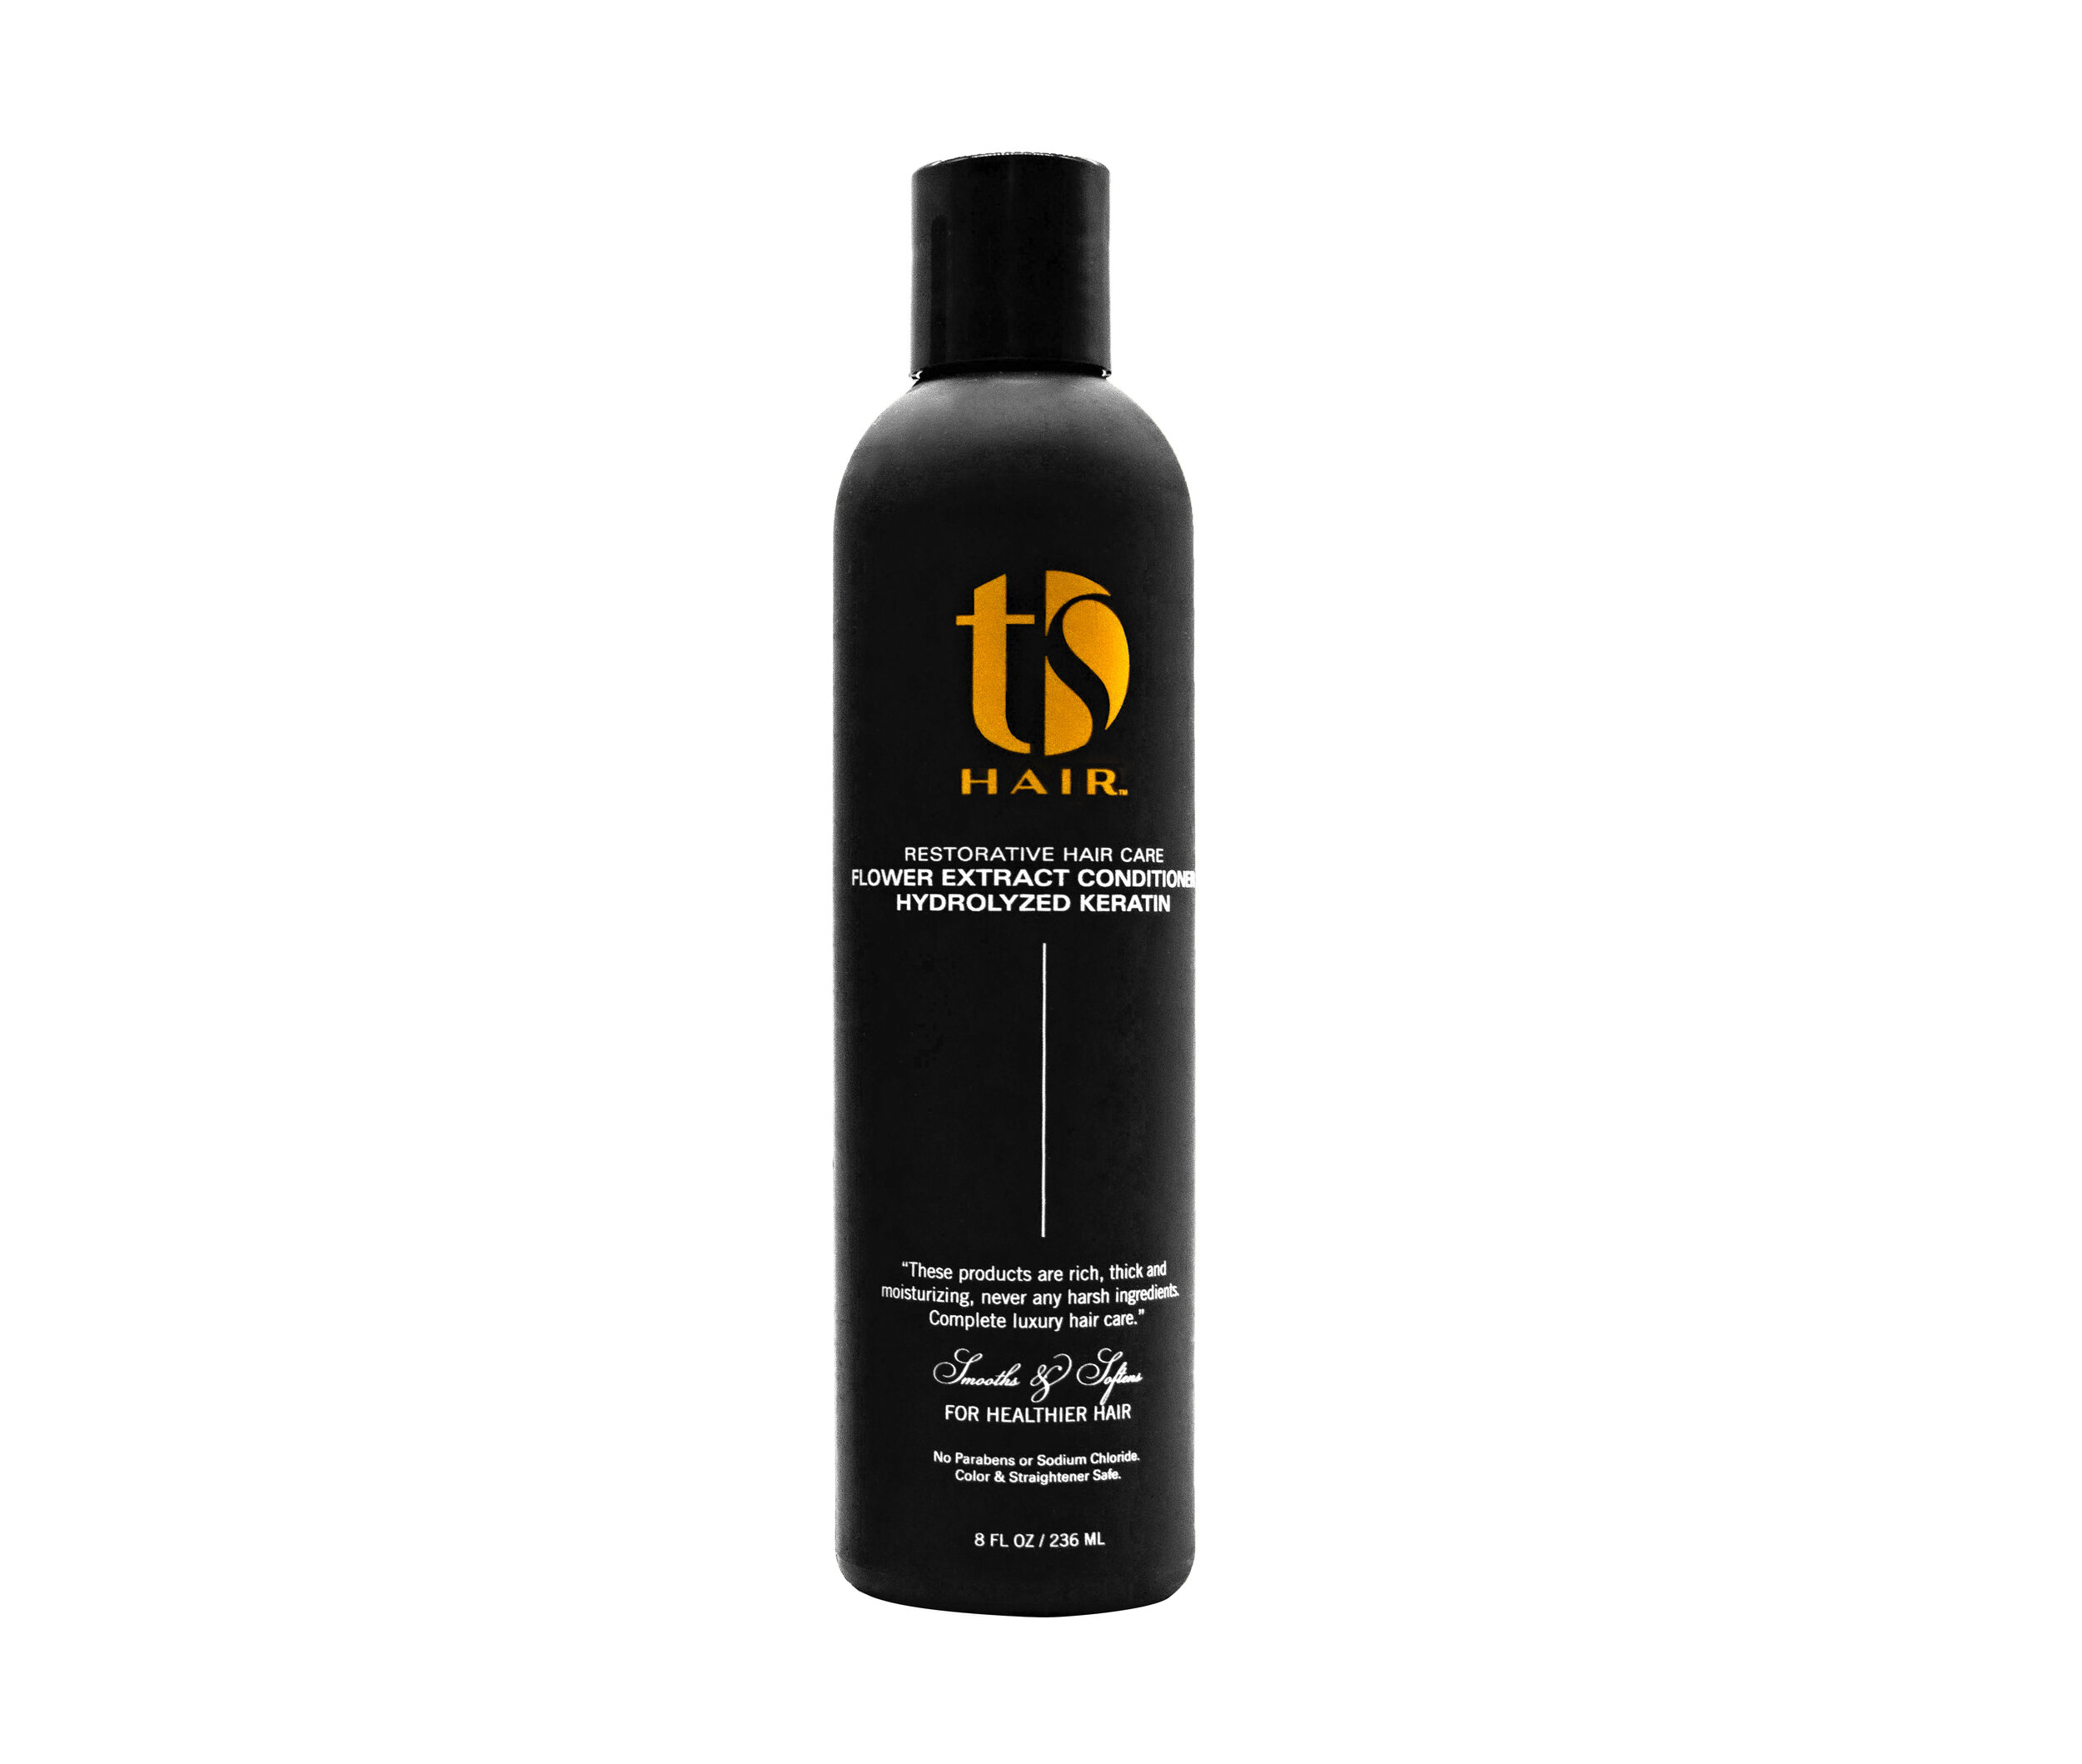 TSD HAIR — Flower Extract Conditioner